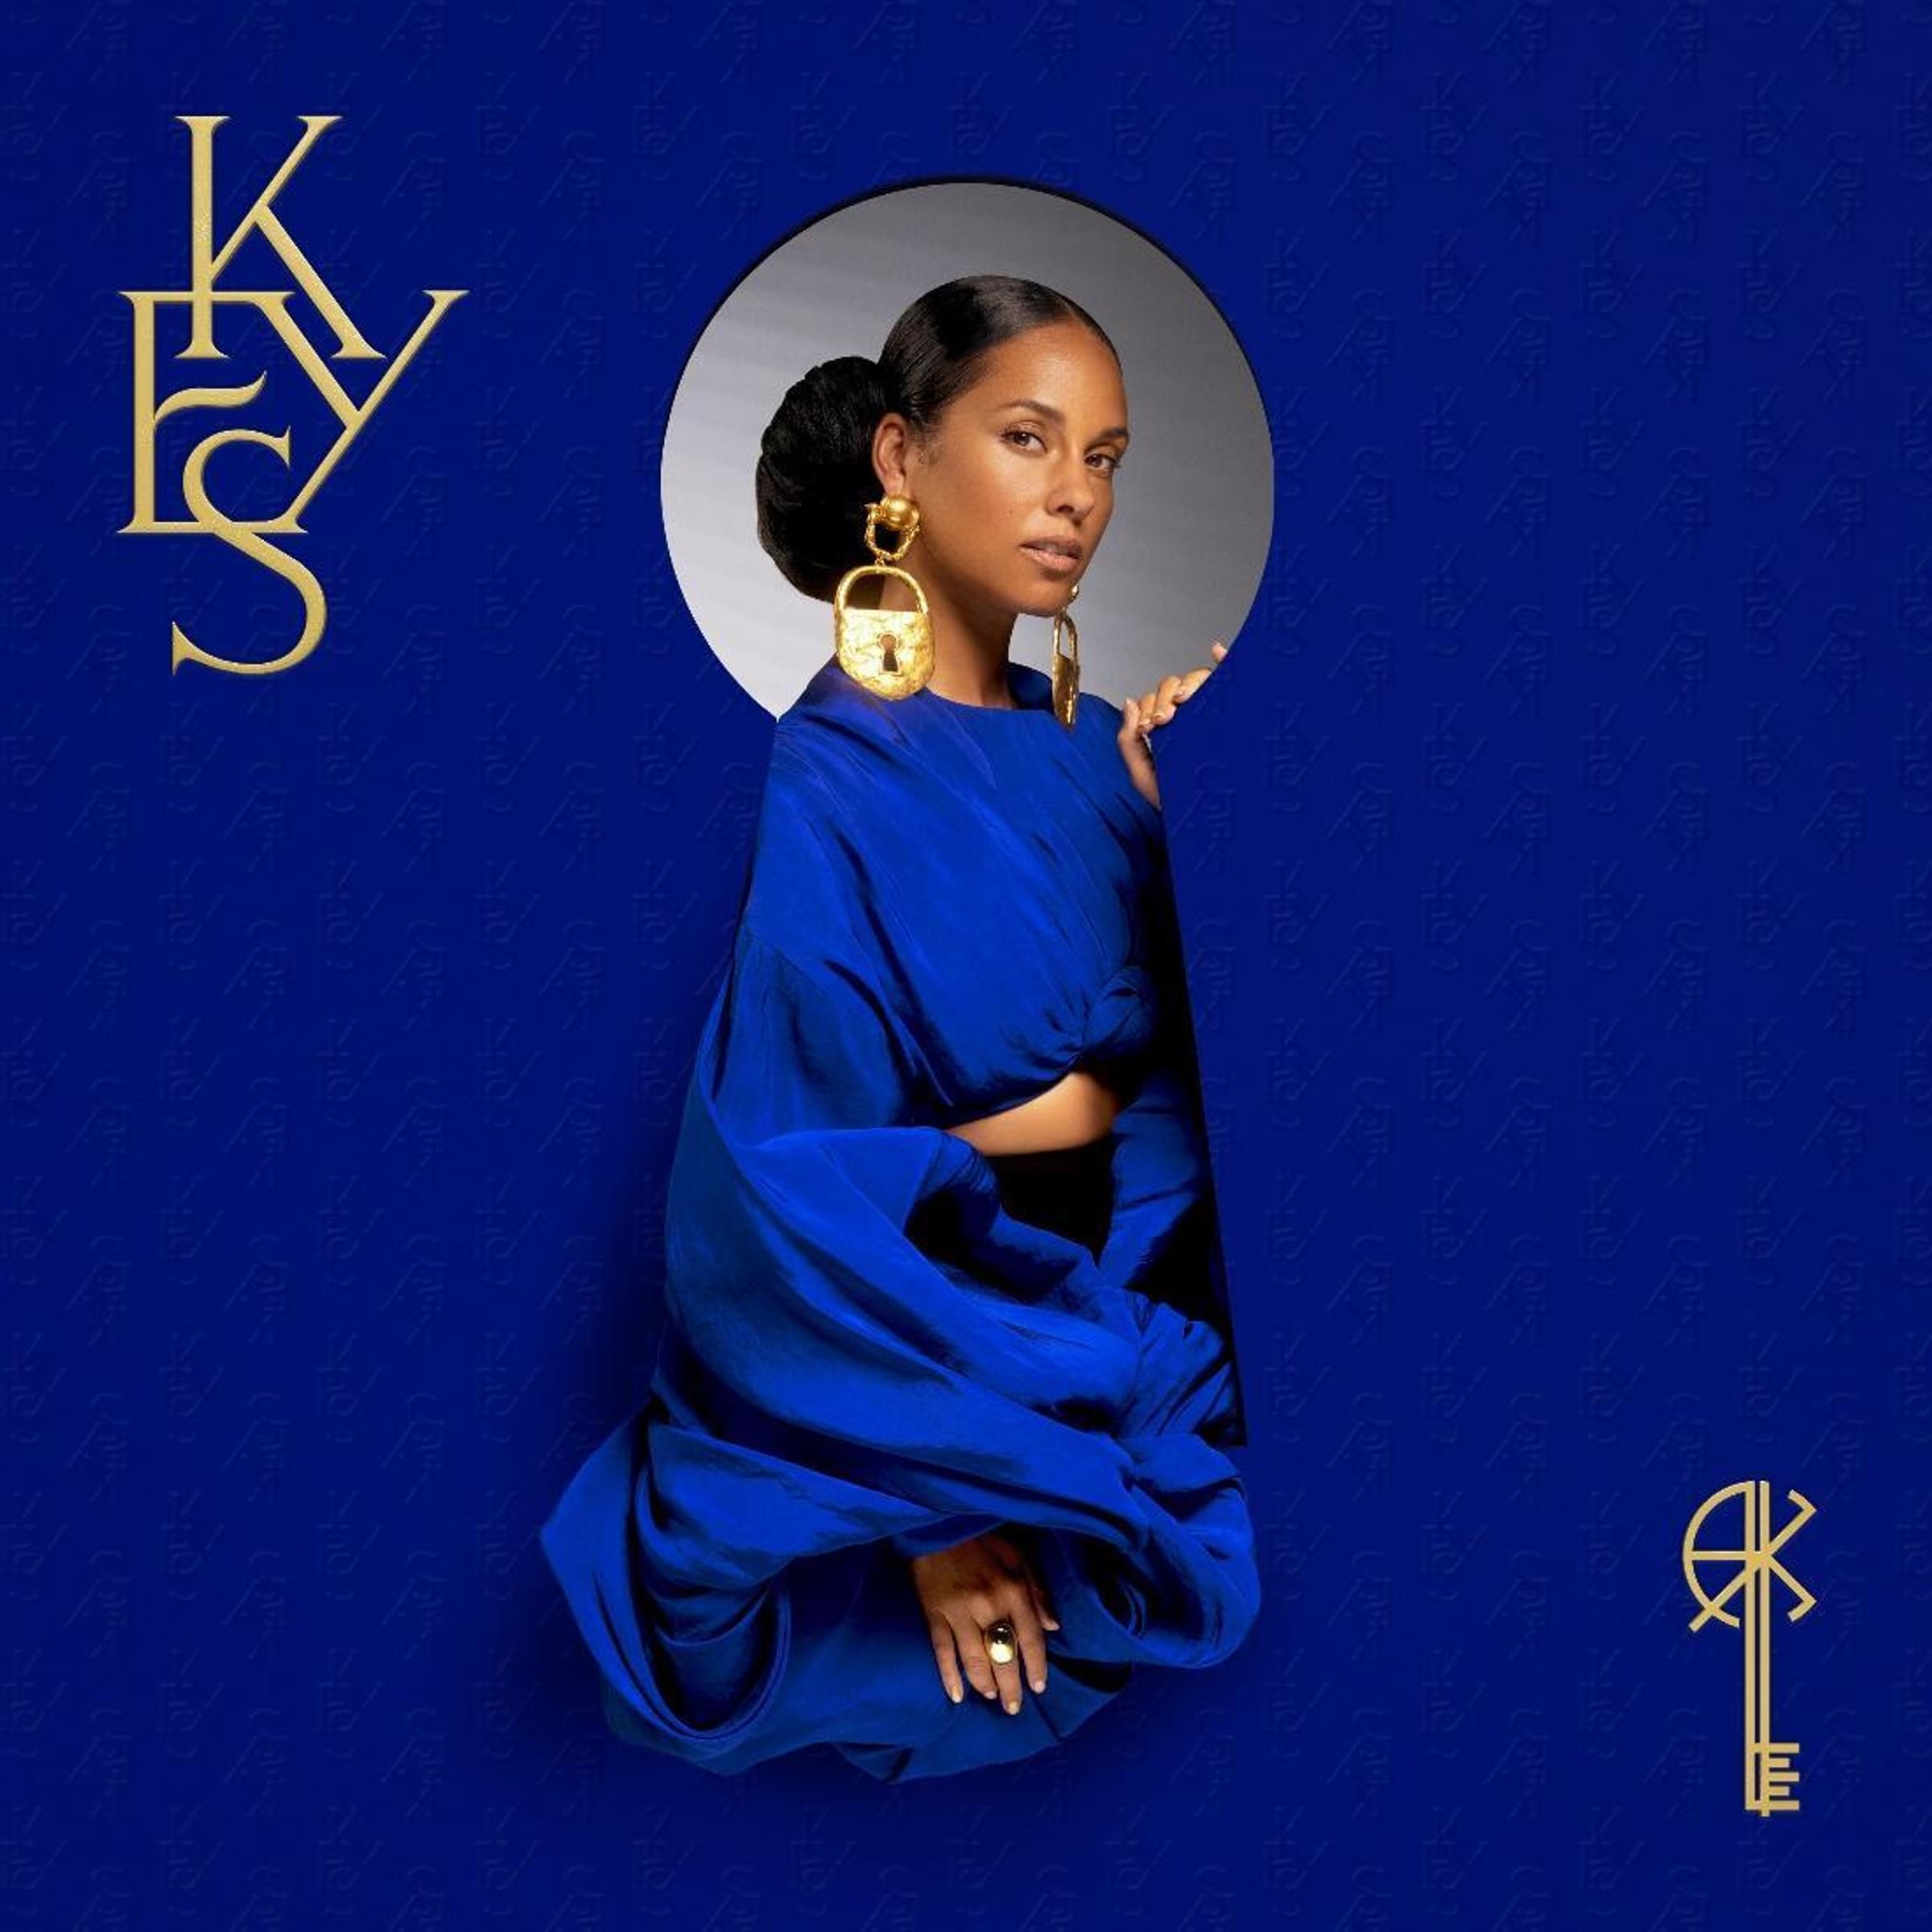 Alicia Keys continues to settle into a fruitful groove on the unique